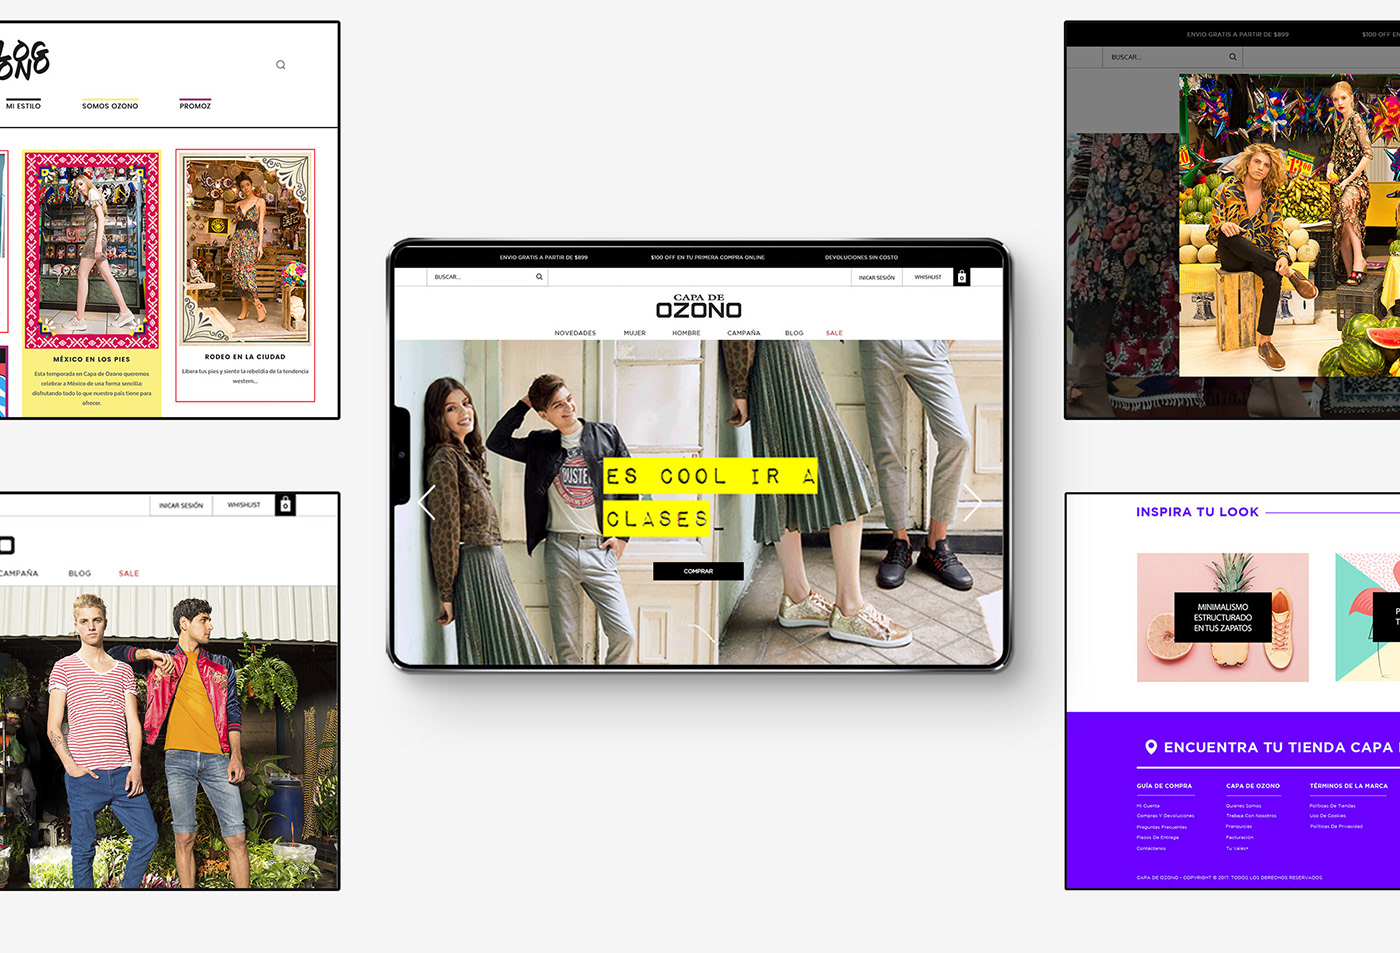 catalog Ecommerce fashion brand shoes UI/UX user experience user interface Web Design  ecommerce website online store